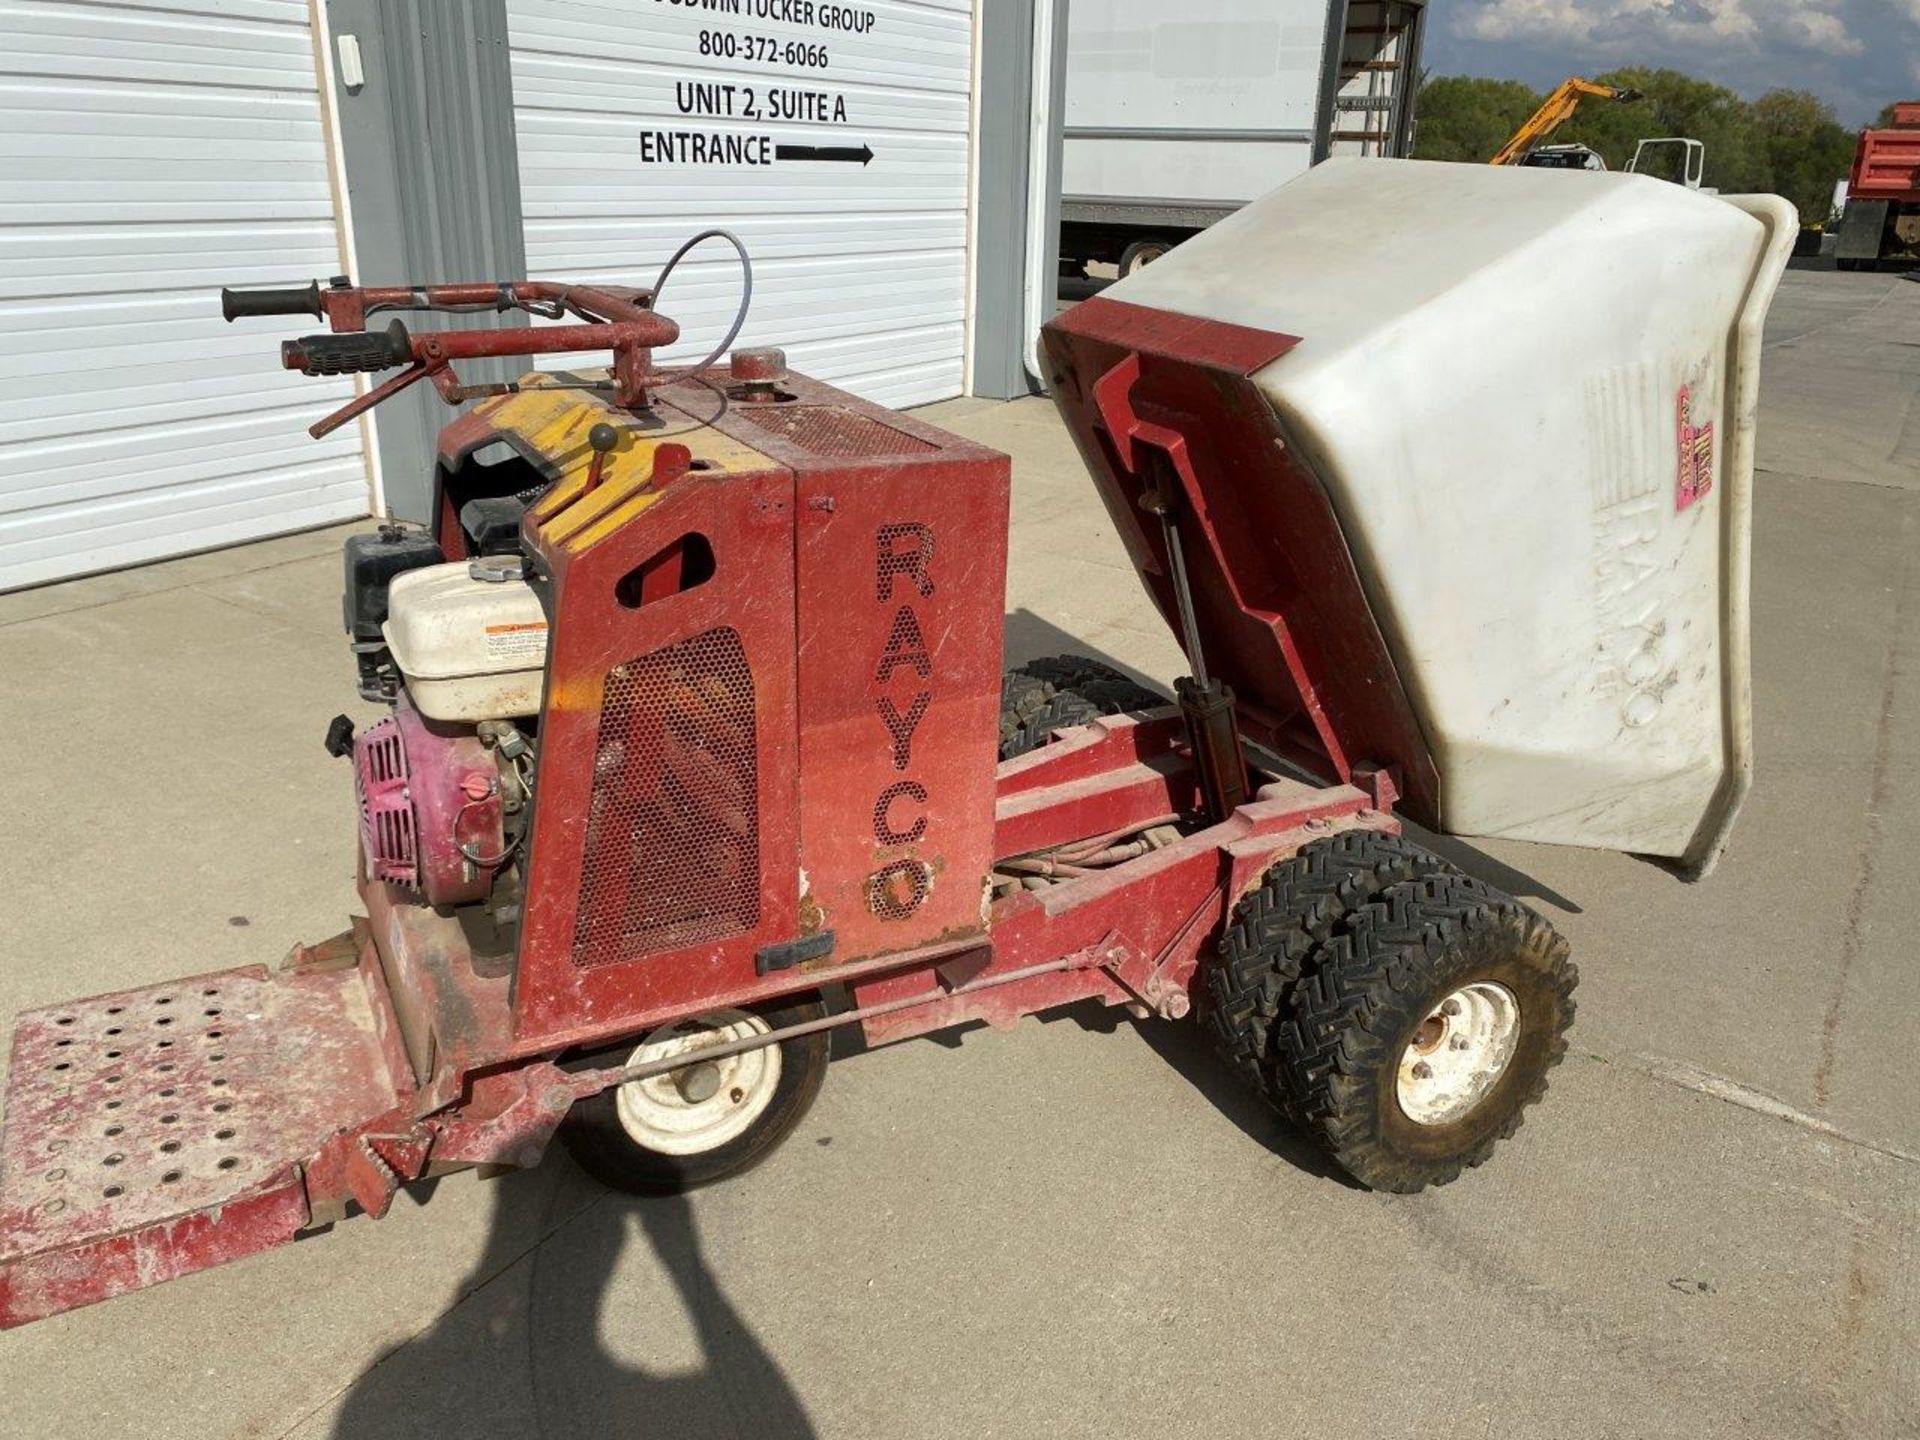 Rayco Haulmaster Power buggy, model and serial is unavailable, Honda 13 hp gas powered engine, - Image 16 of 16